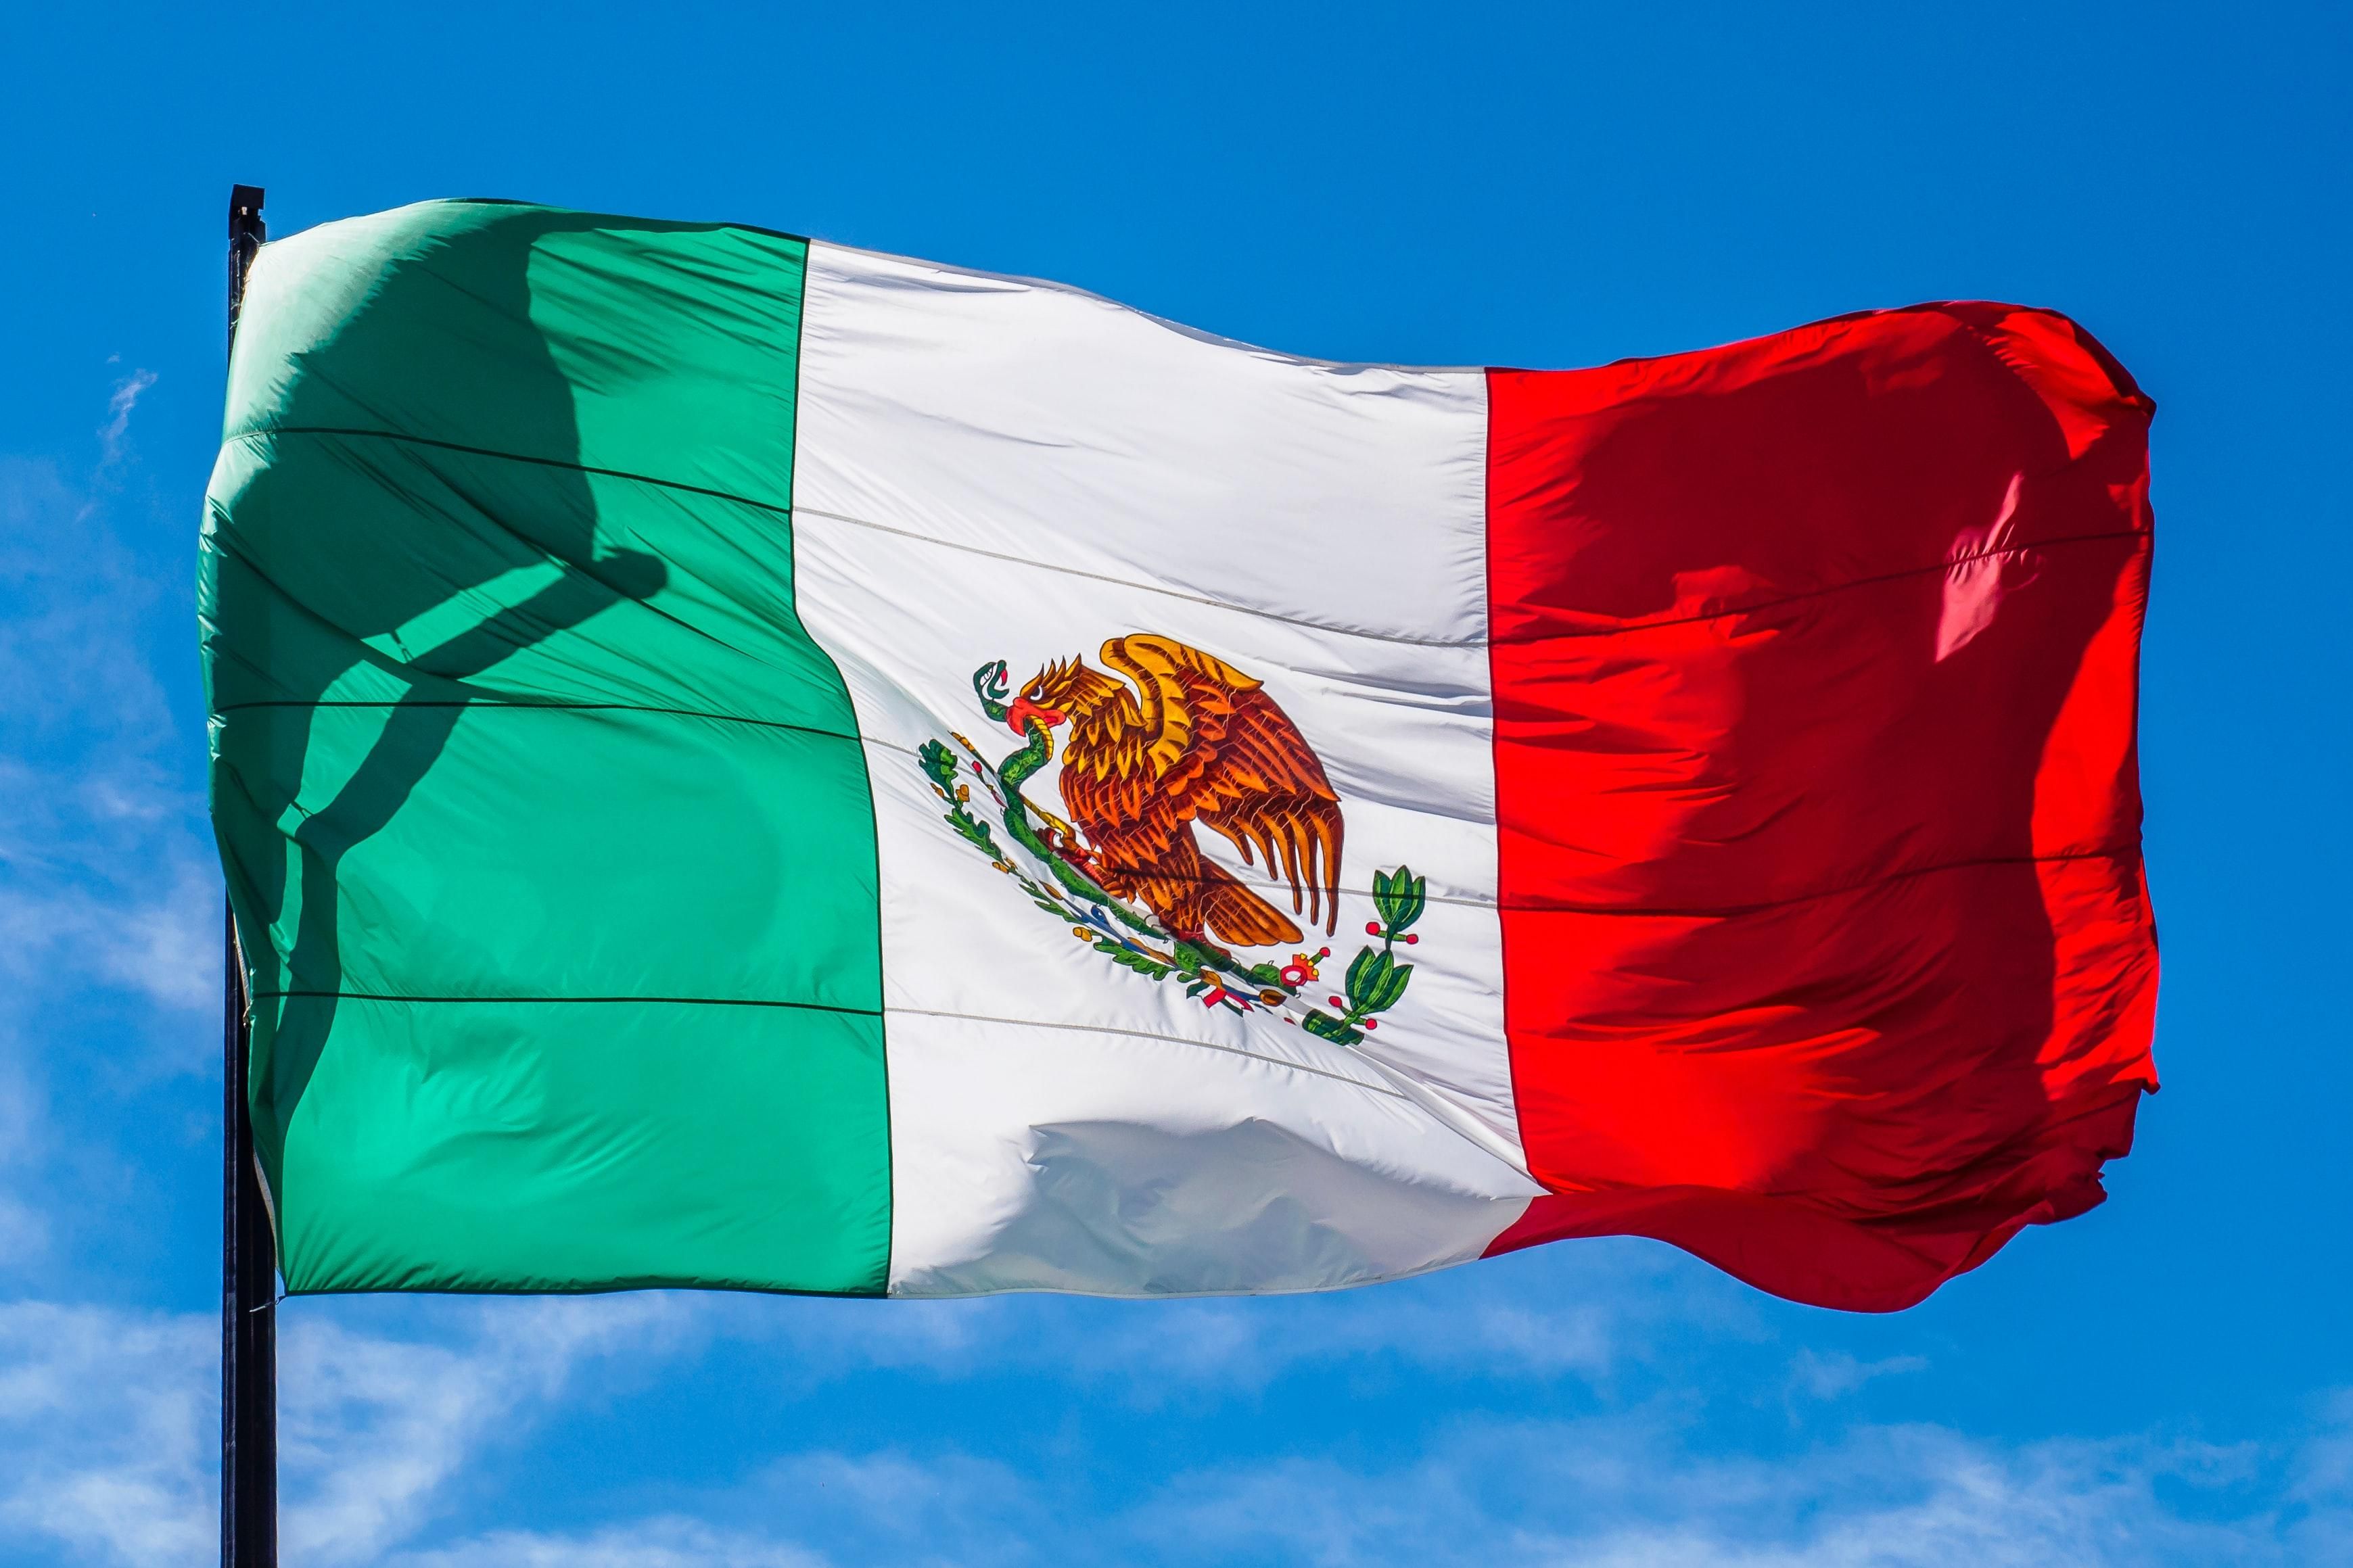 the Mexican flag waving in the wind.